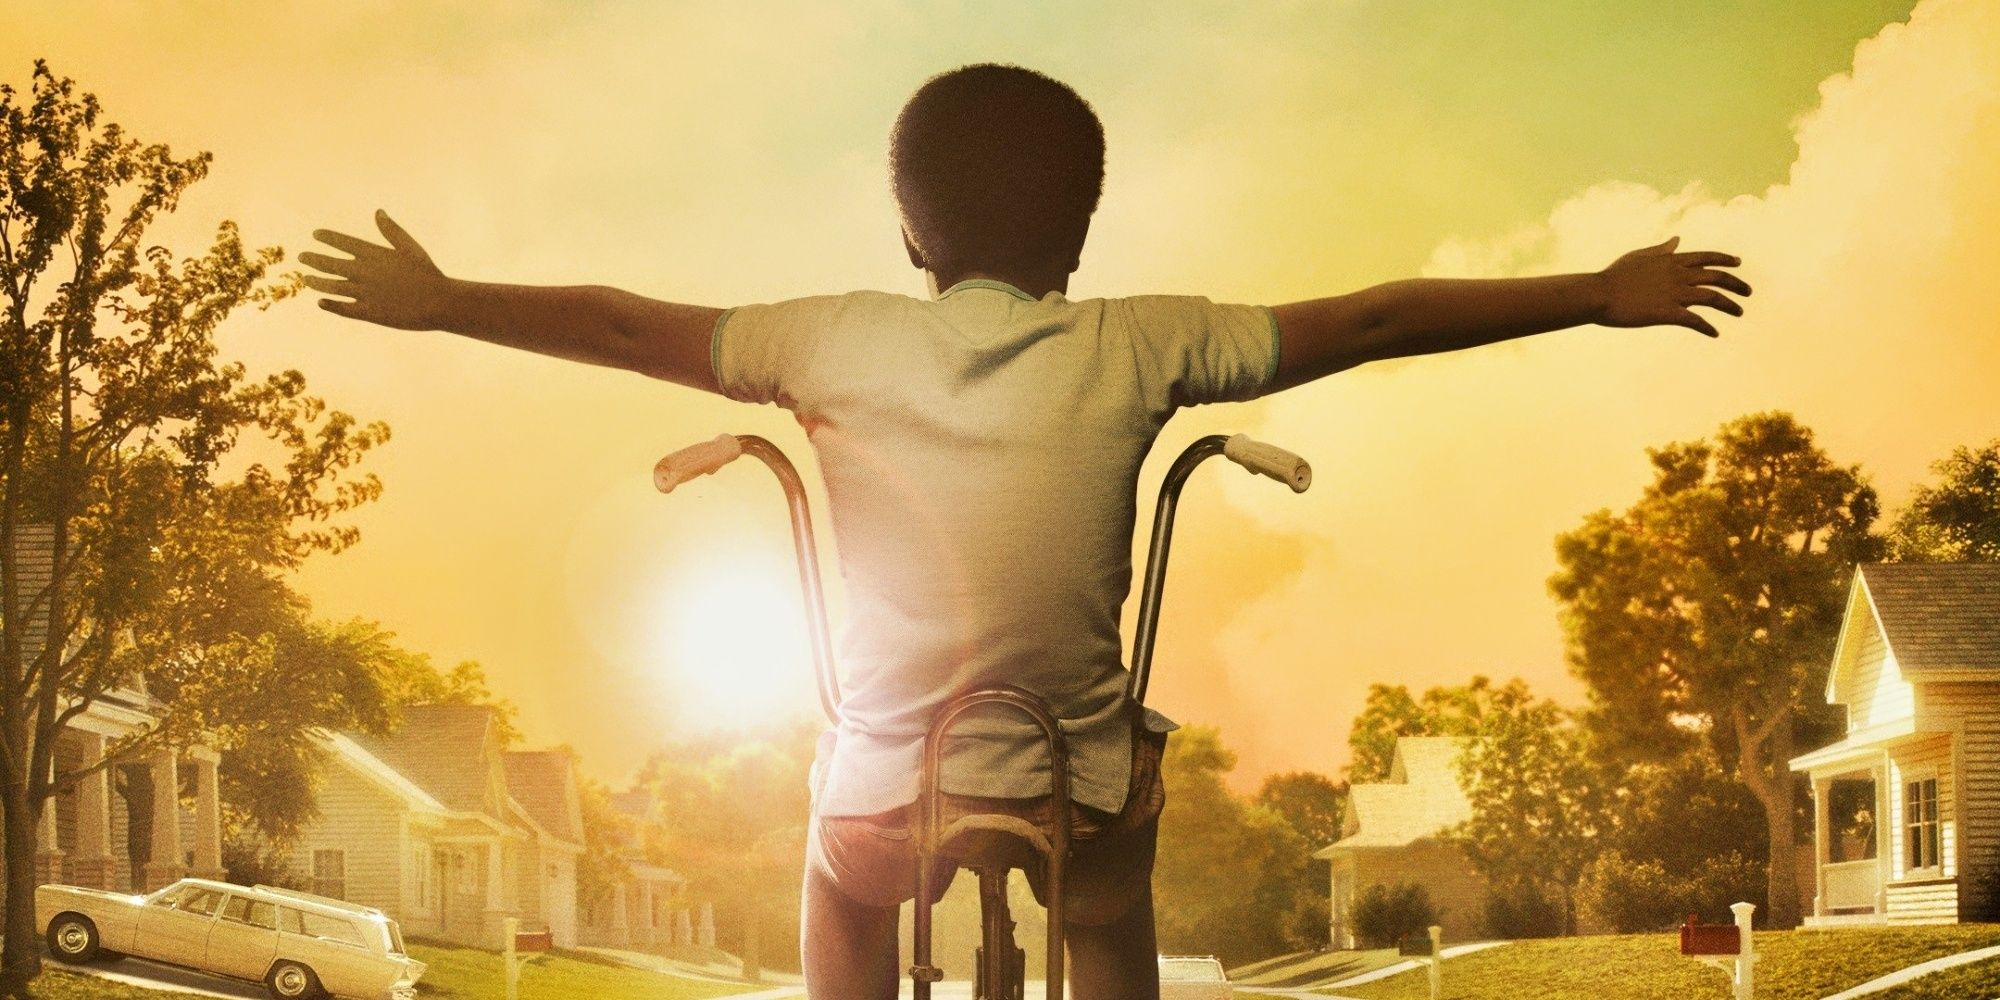 A boy spreading his arms while riding his bike in The Wonder Years reboot